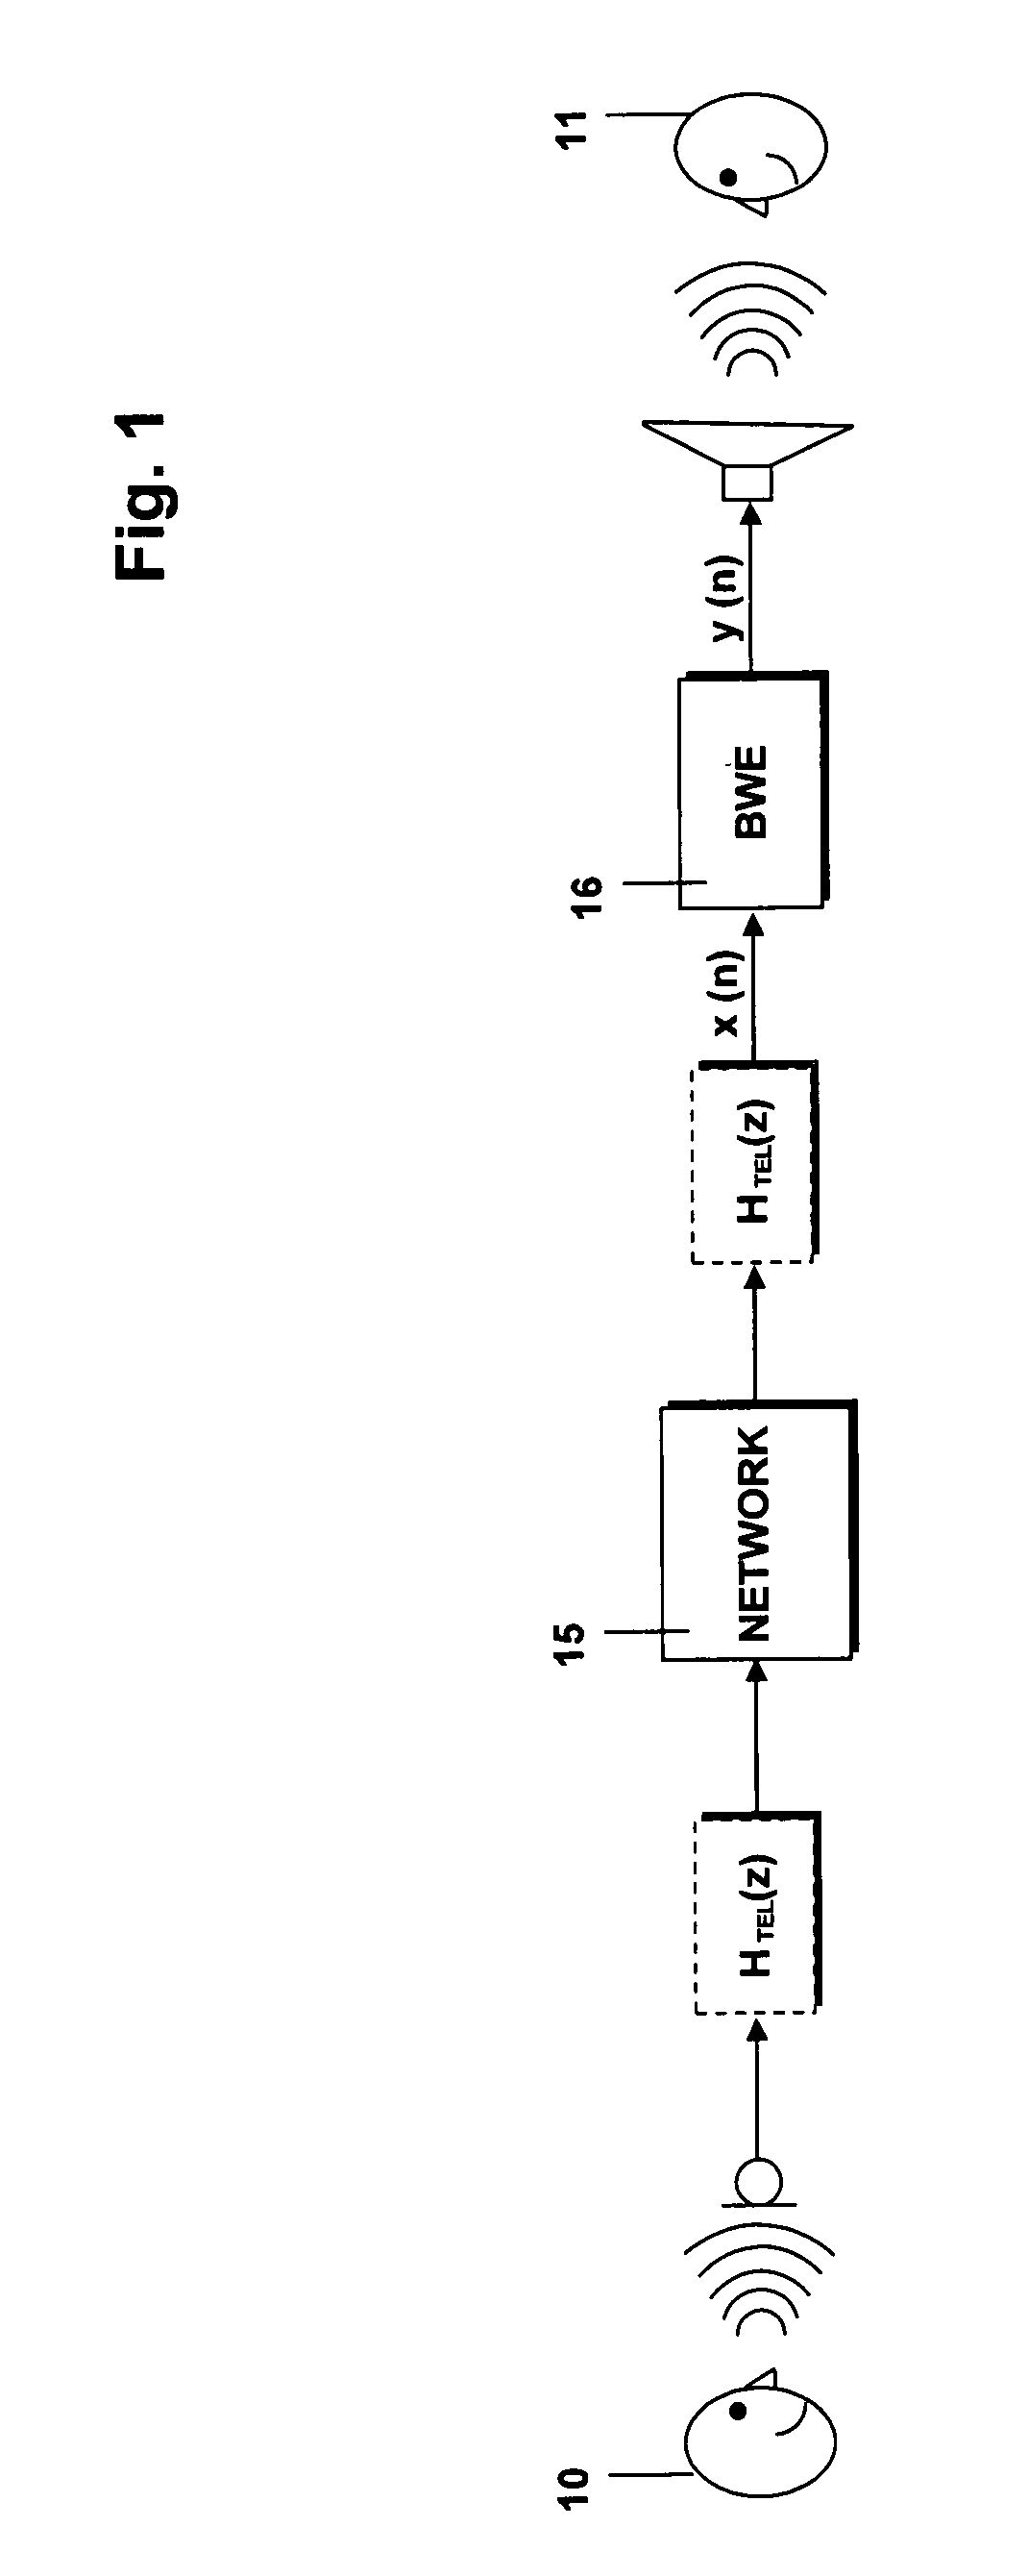 System and method for extending spectral bandwidth of an audio signal